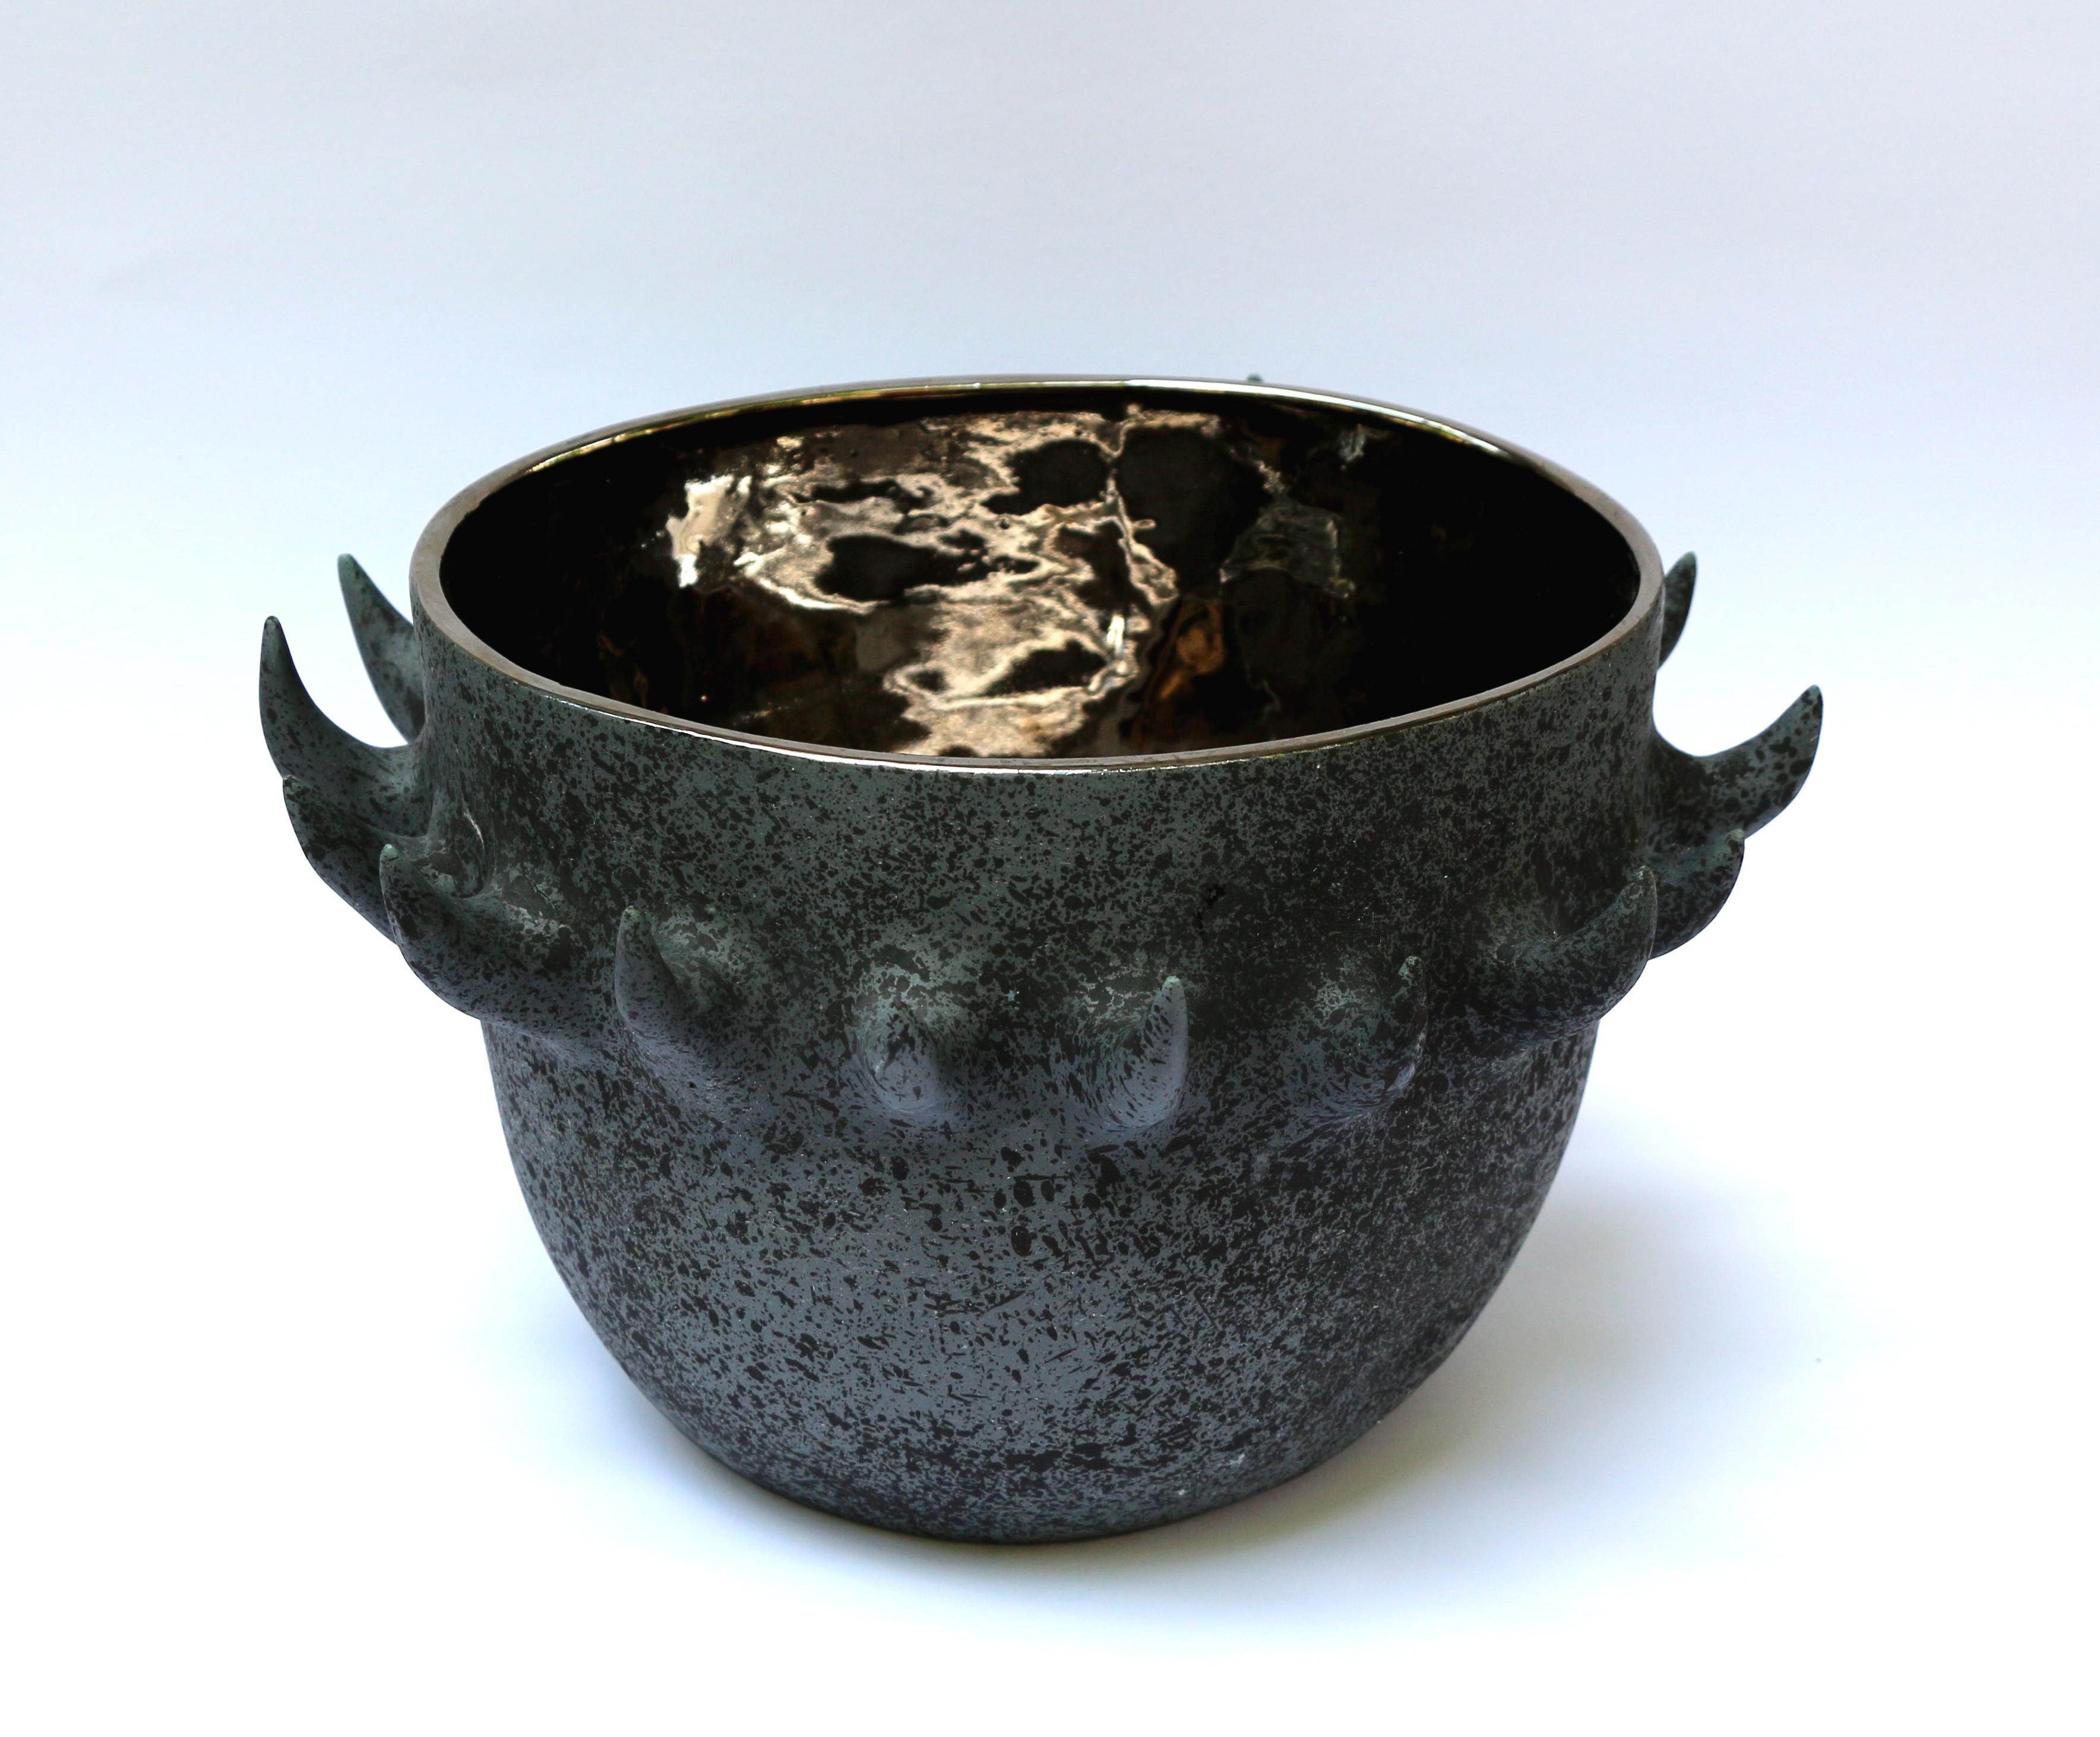 Mosko Eklektik bowl by Nów
Designed by Mosko 
Dimensions: D 33 x W 28 x H 20 cm
Materials: porcelain, platinum (or gold on demand)

Monika’s fascination for work with ceramic began with her first contact with soft clay. At first, formless mass